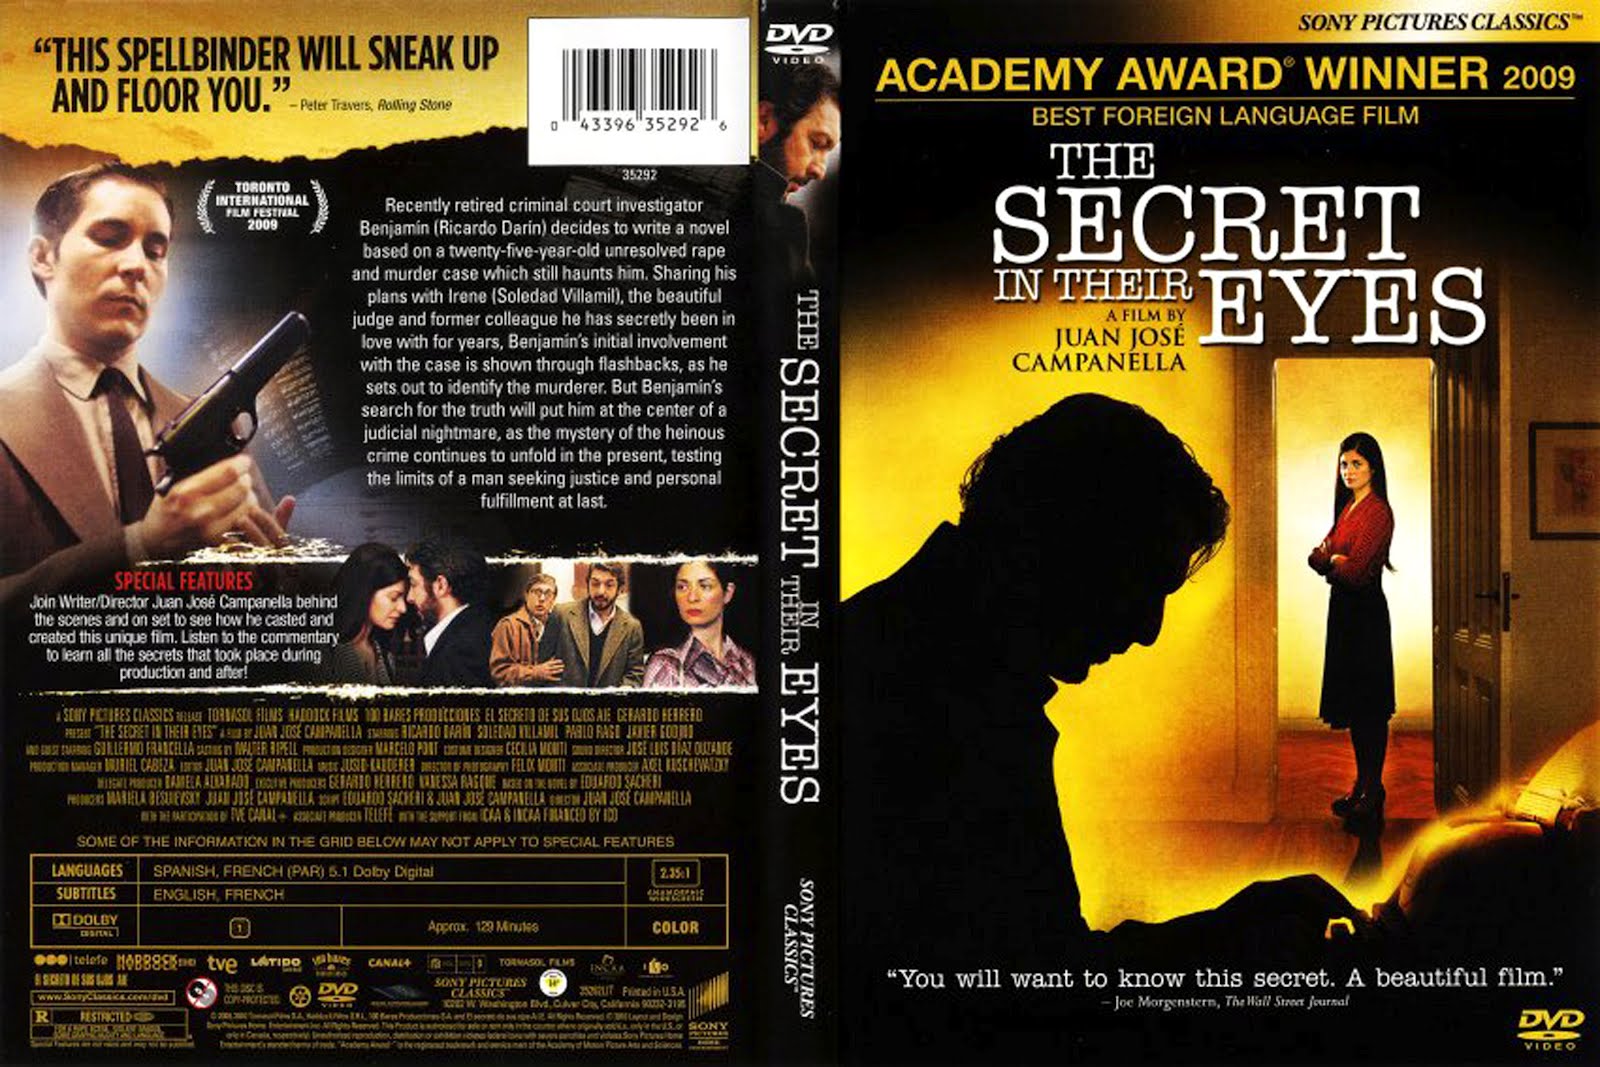 Movie Posters World Dvd Covers Dvd Label Art Blu Ray Case Box Rare Film Posters Regional Movies The Secret In Their Eyes 2009